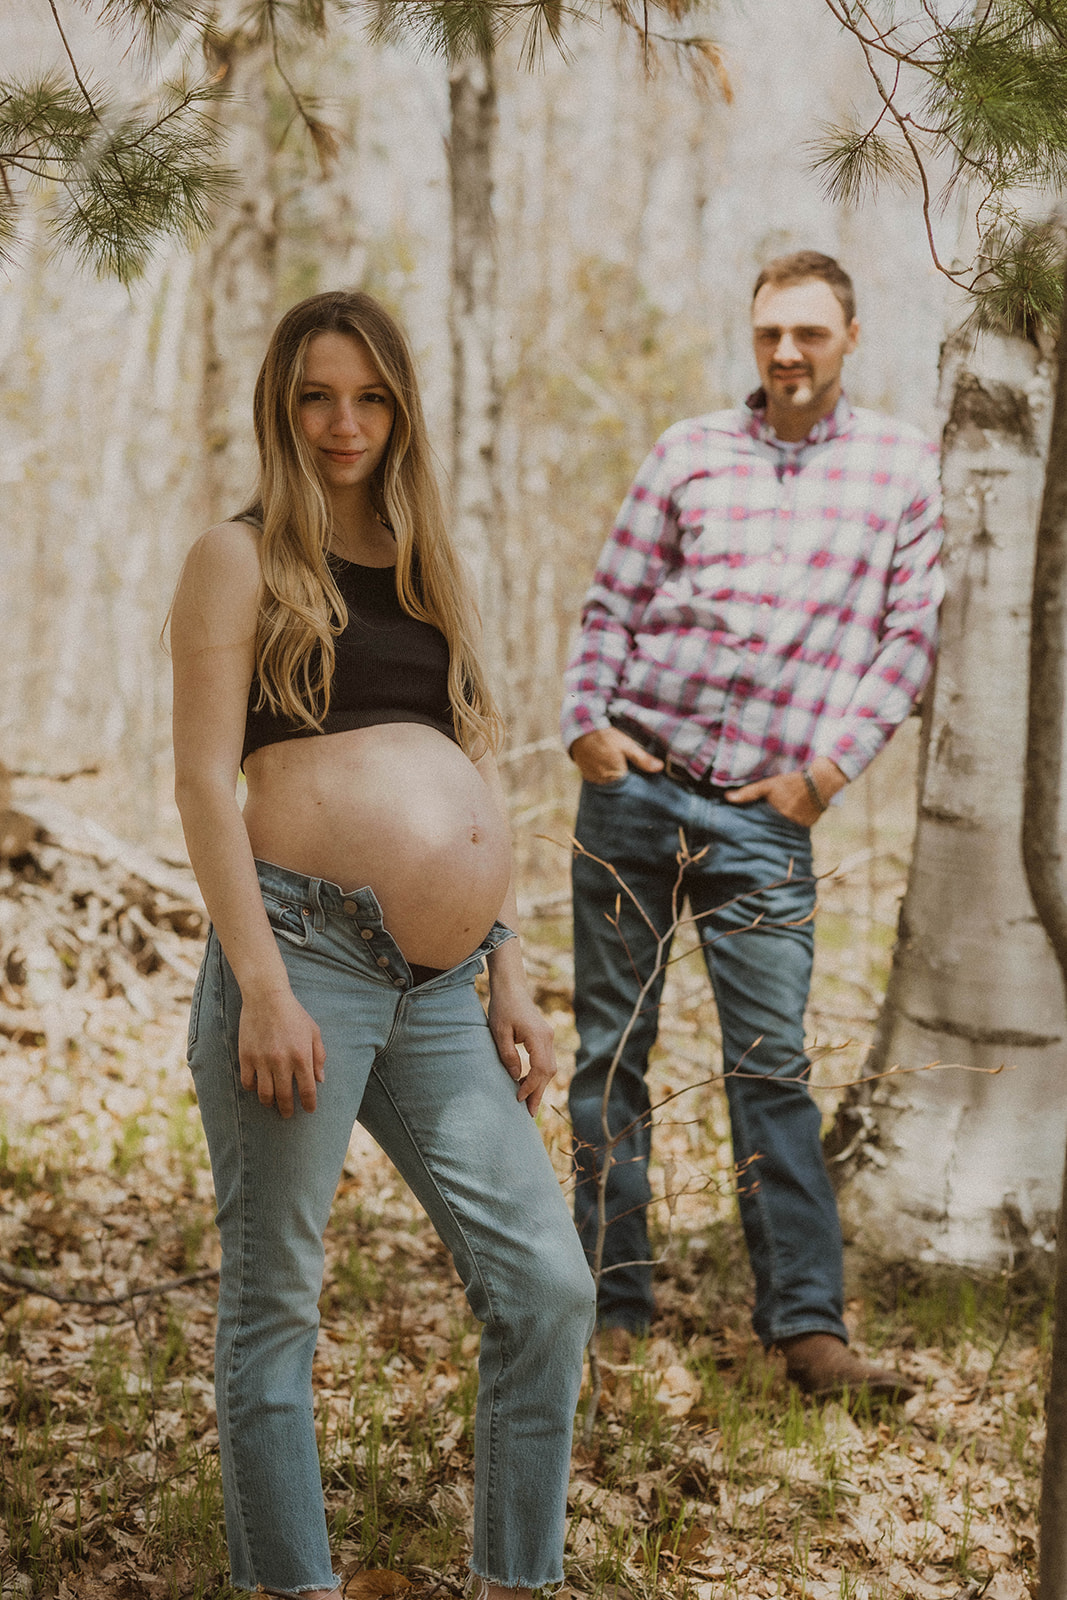 Future mom and dad pose together in the New York wilderness during their Western maternity photos